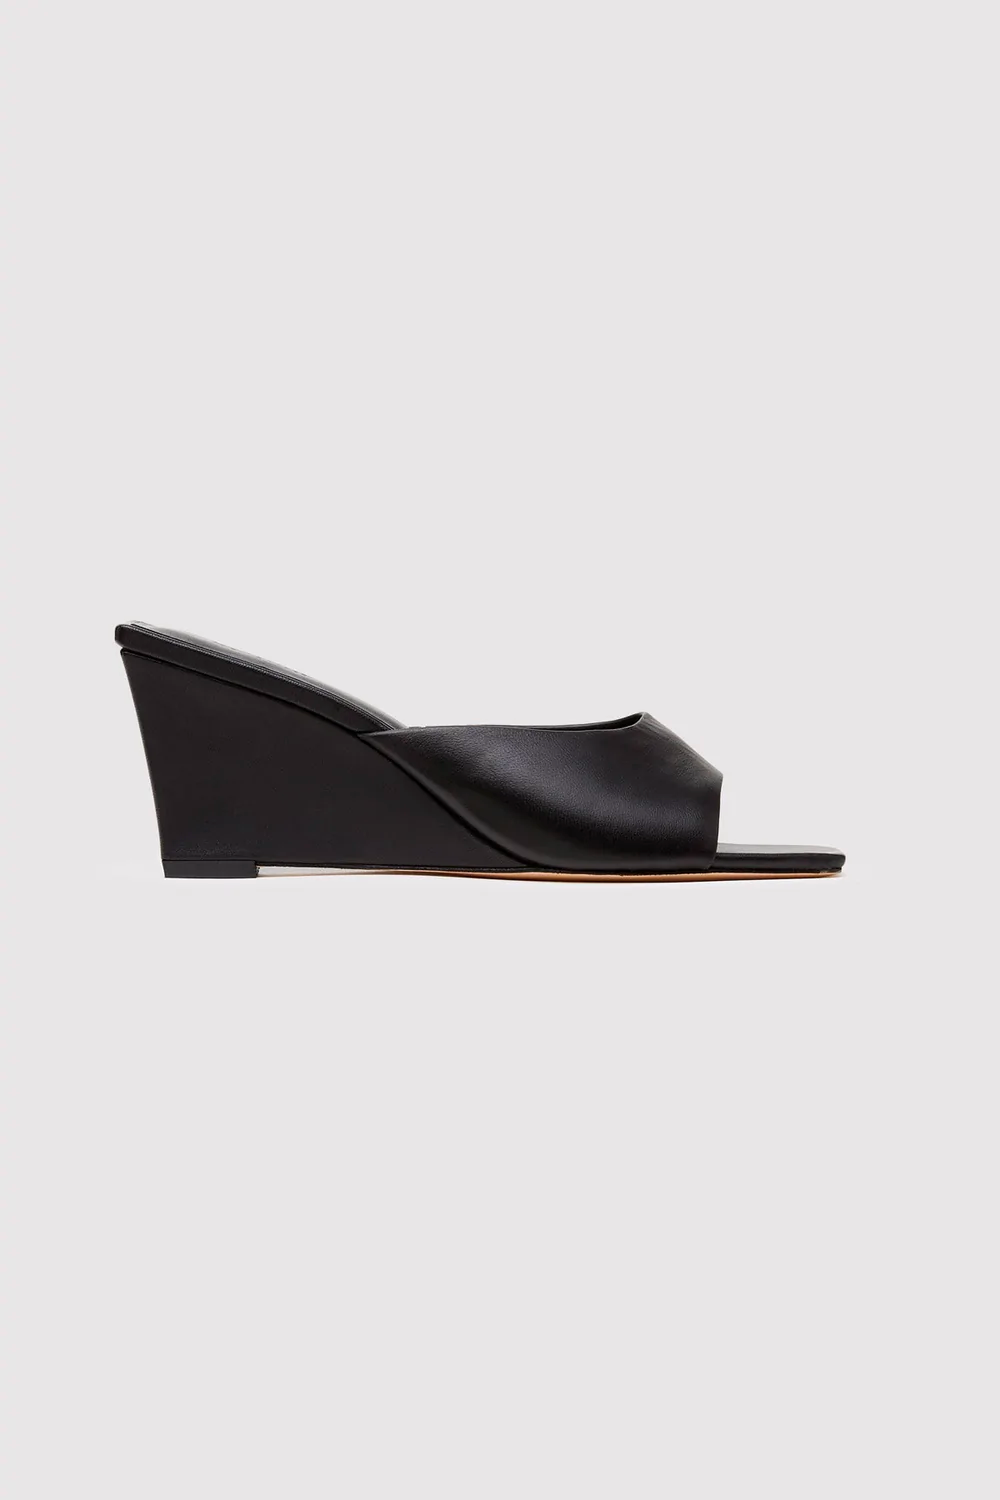 Product Image for Classic Wedge Heel, Black